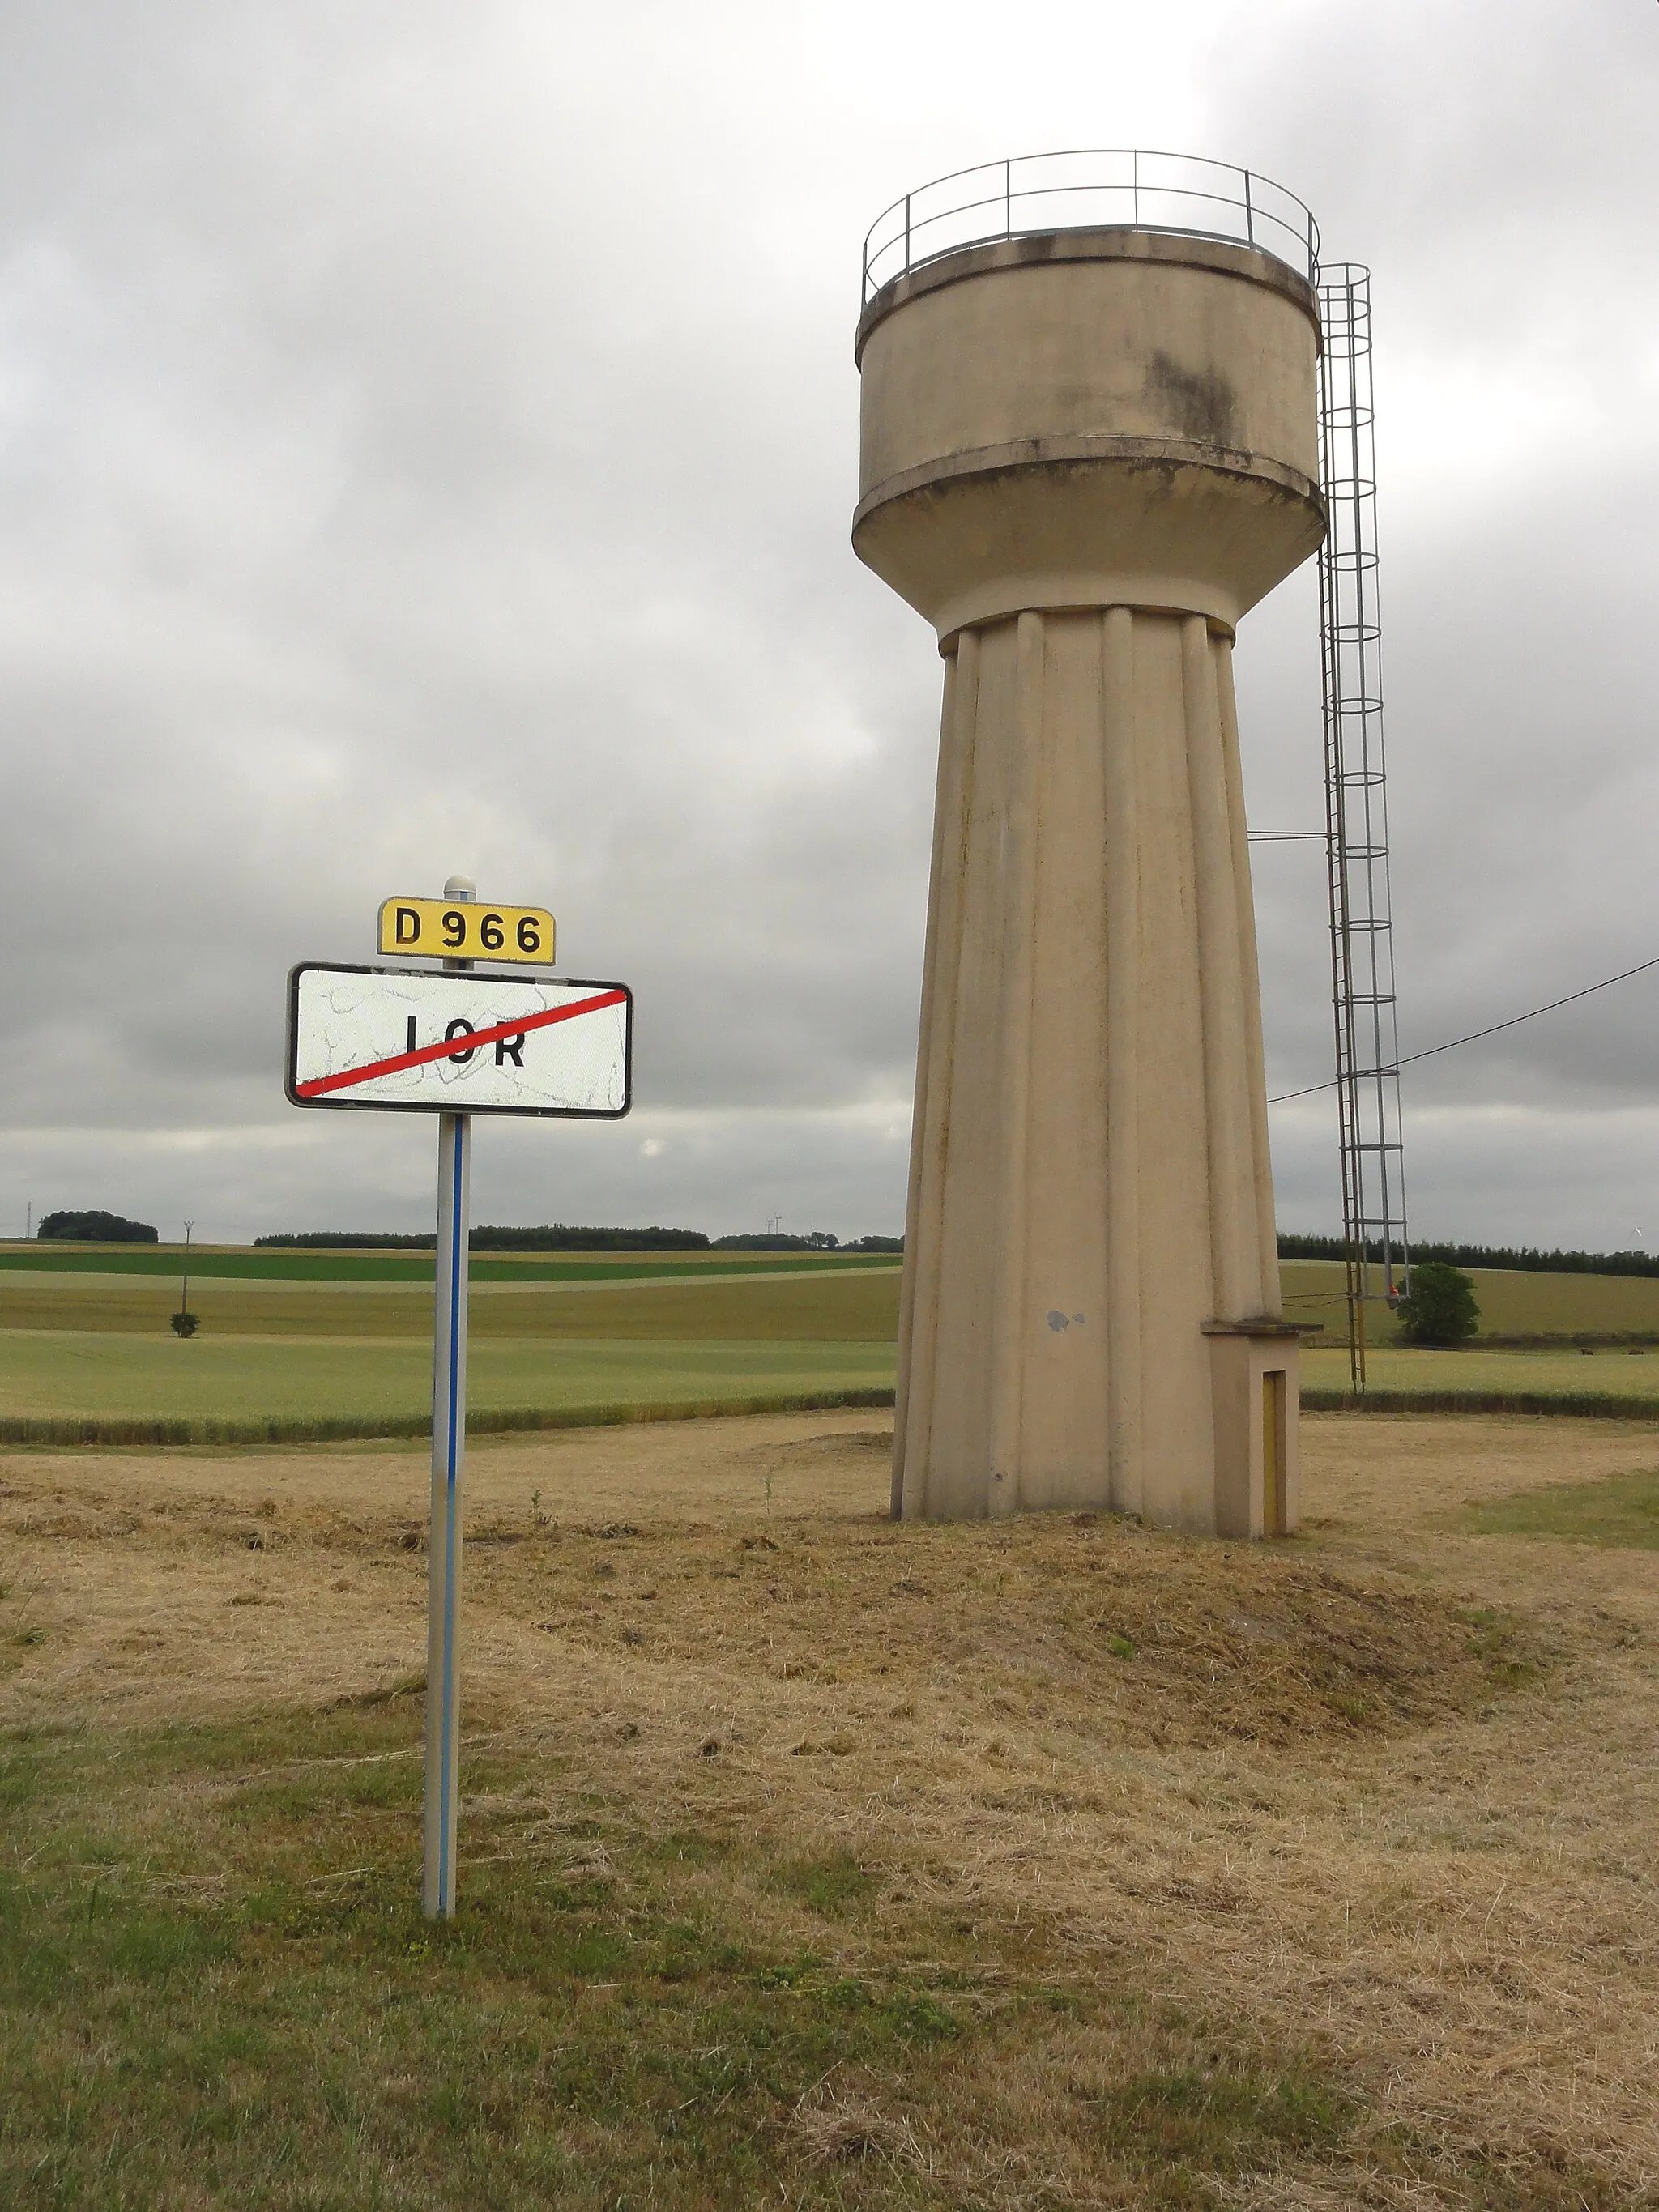 Photo showing: Lor (Aisne) city limit sign and water tower